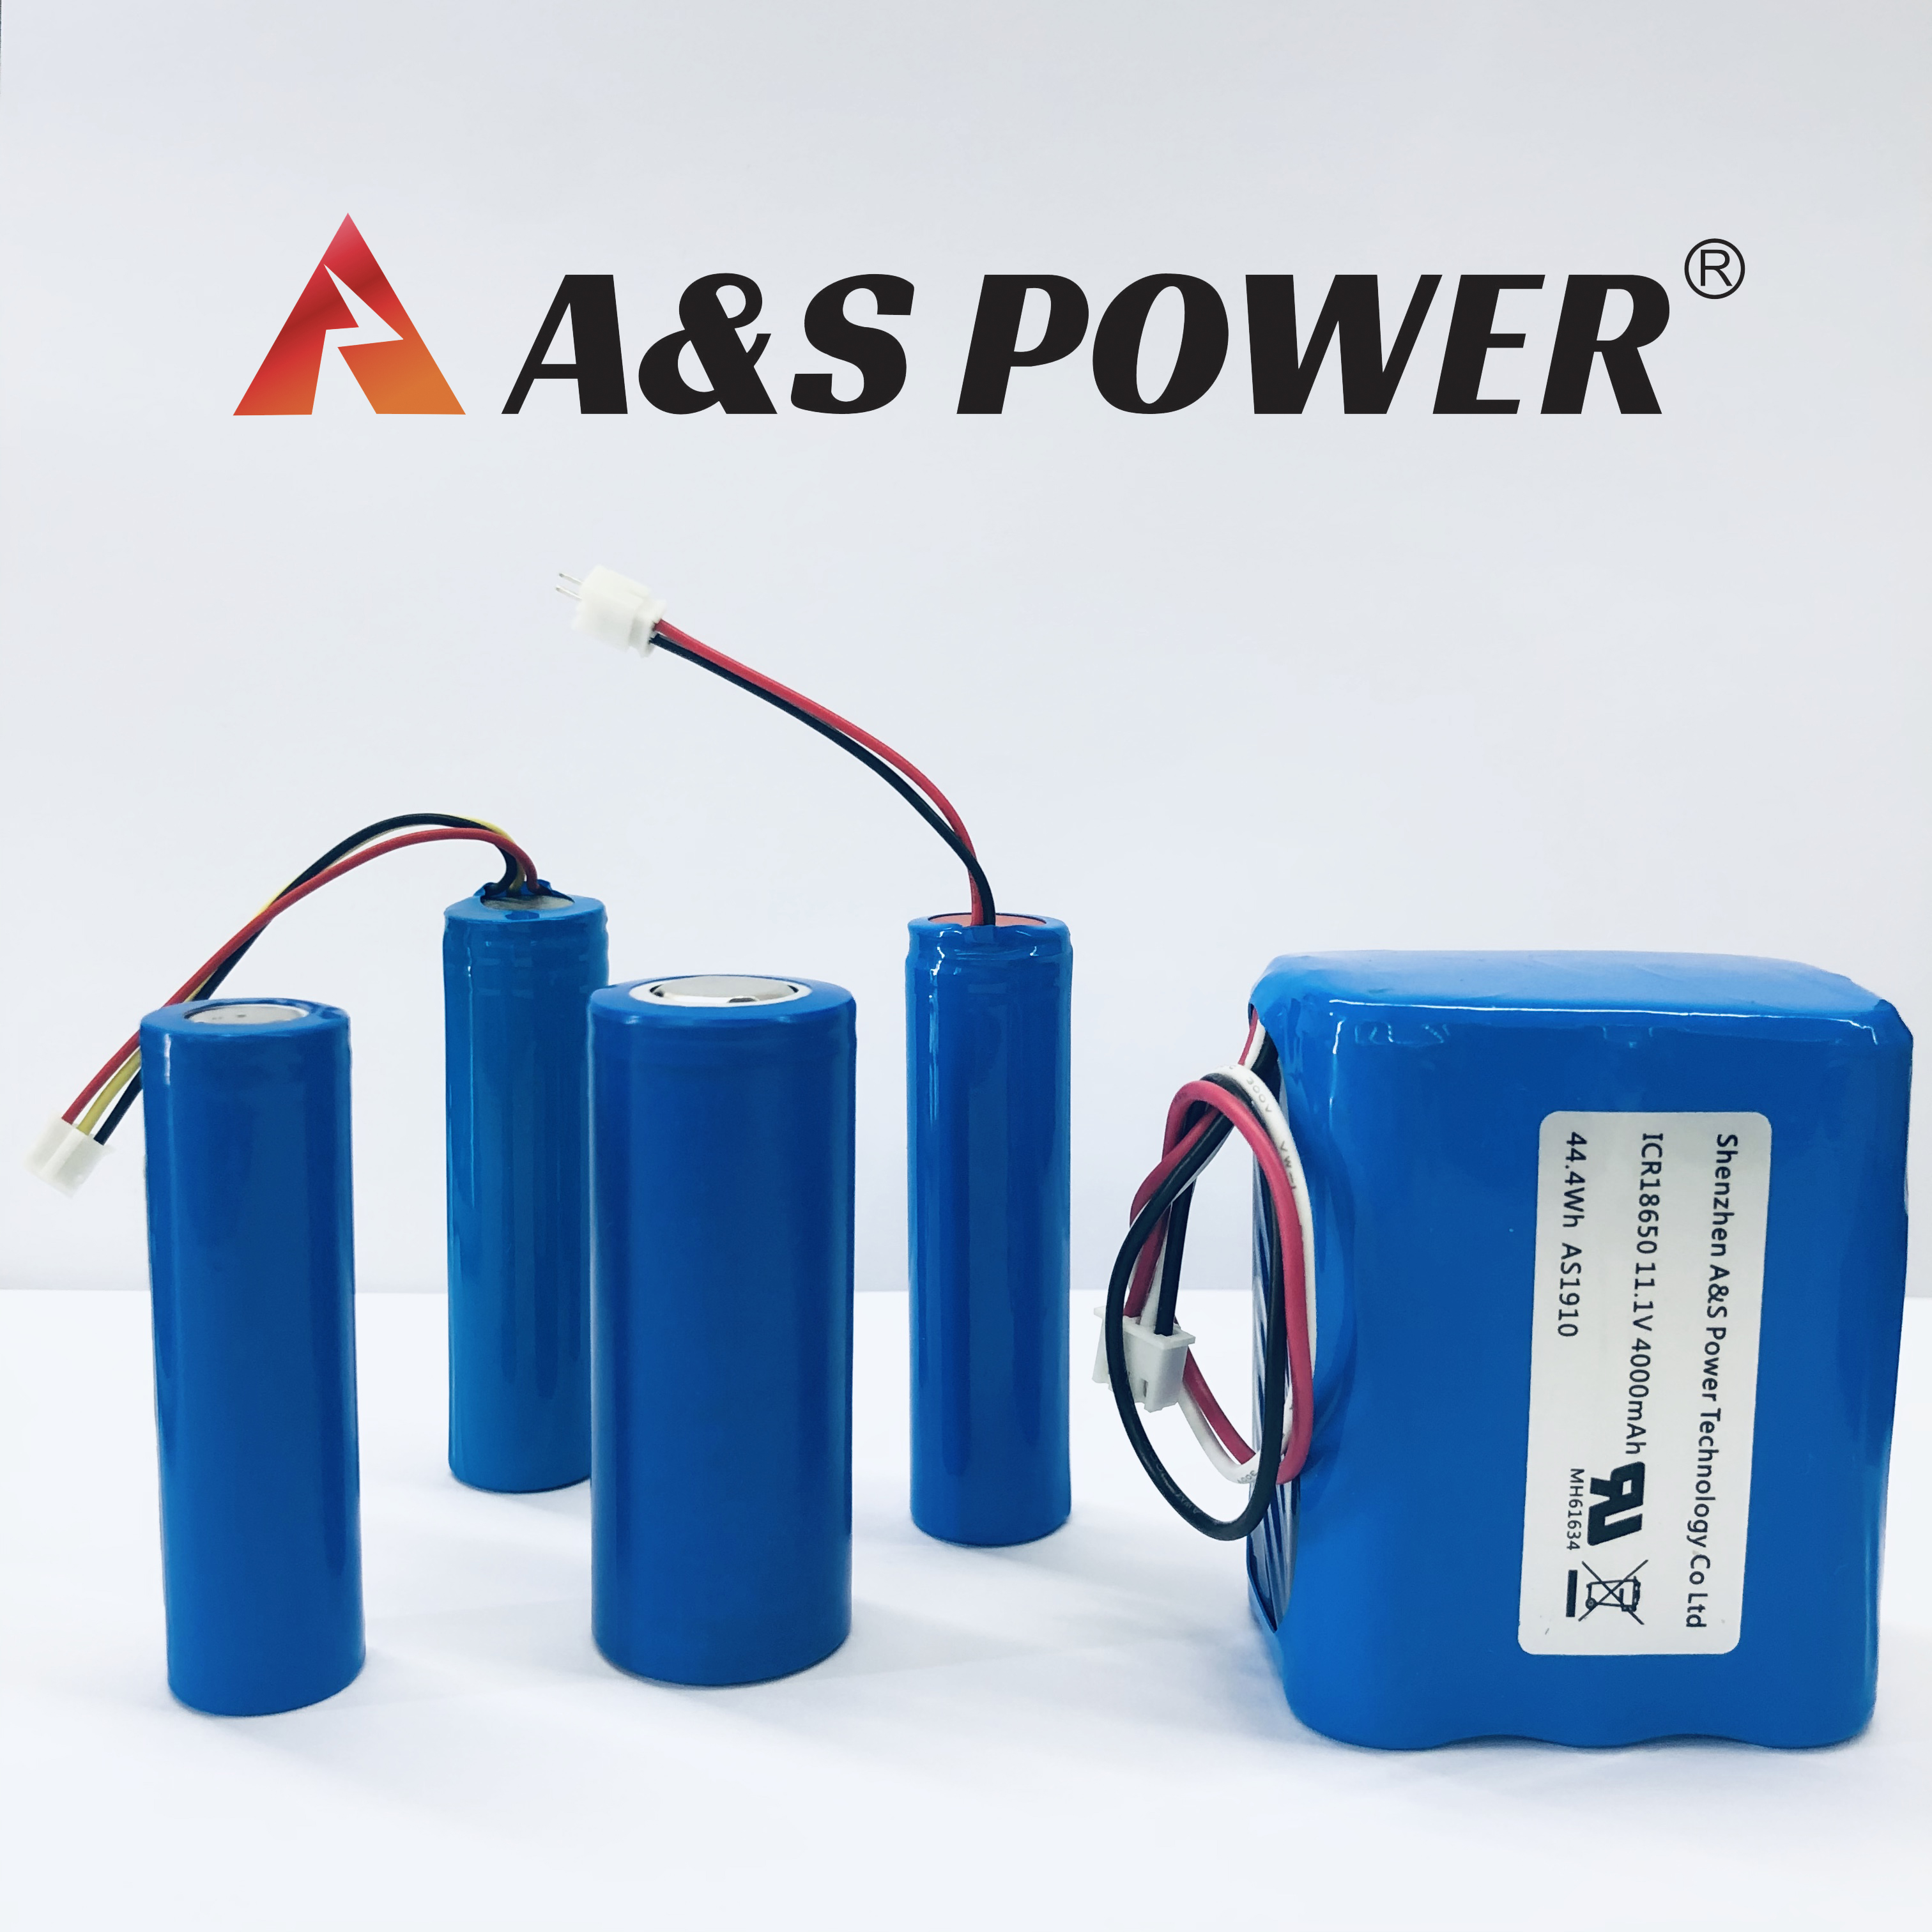 A&S Power Lithium Ion Battery